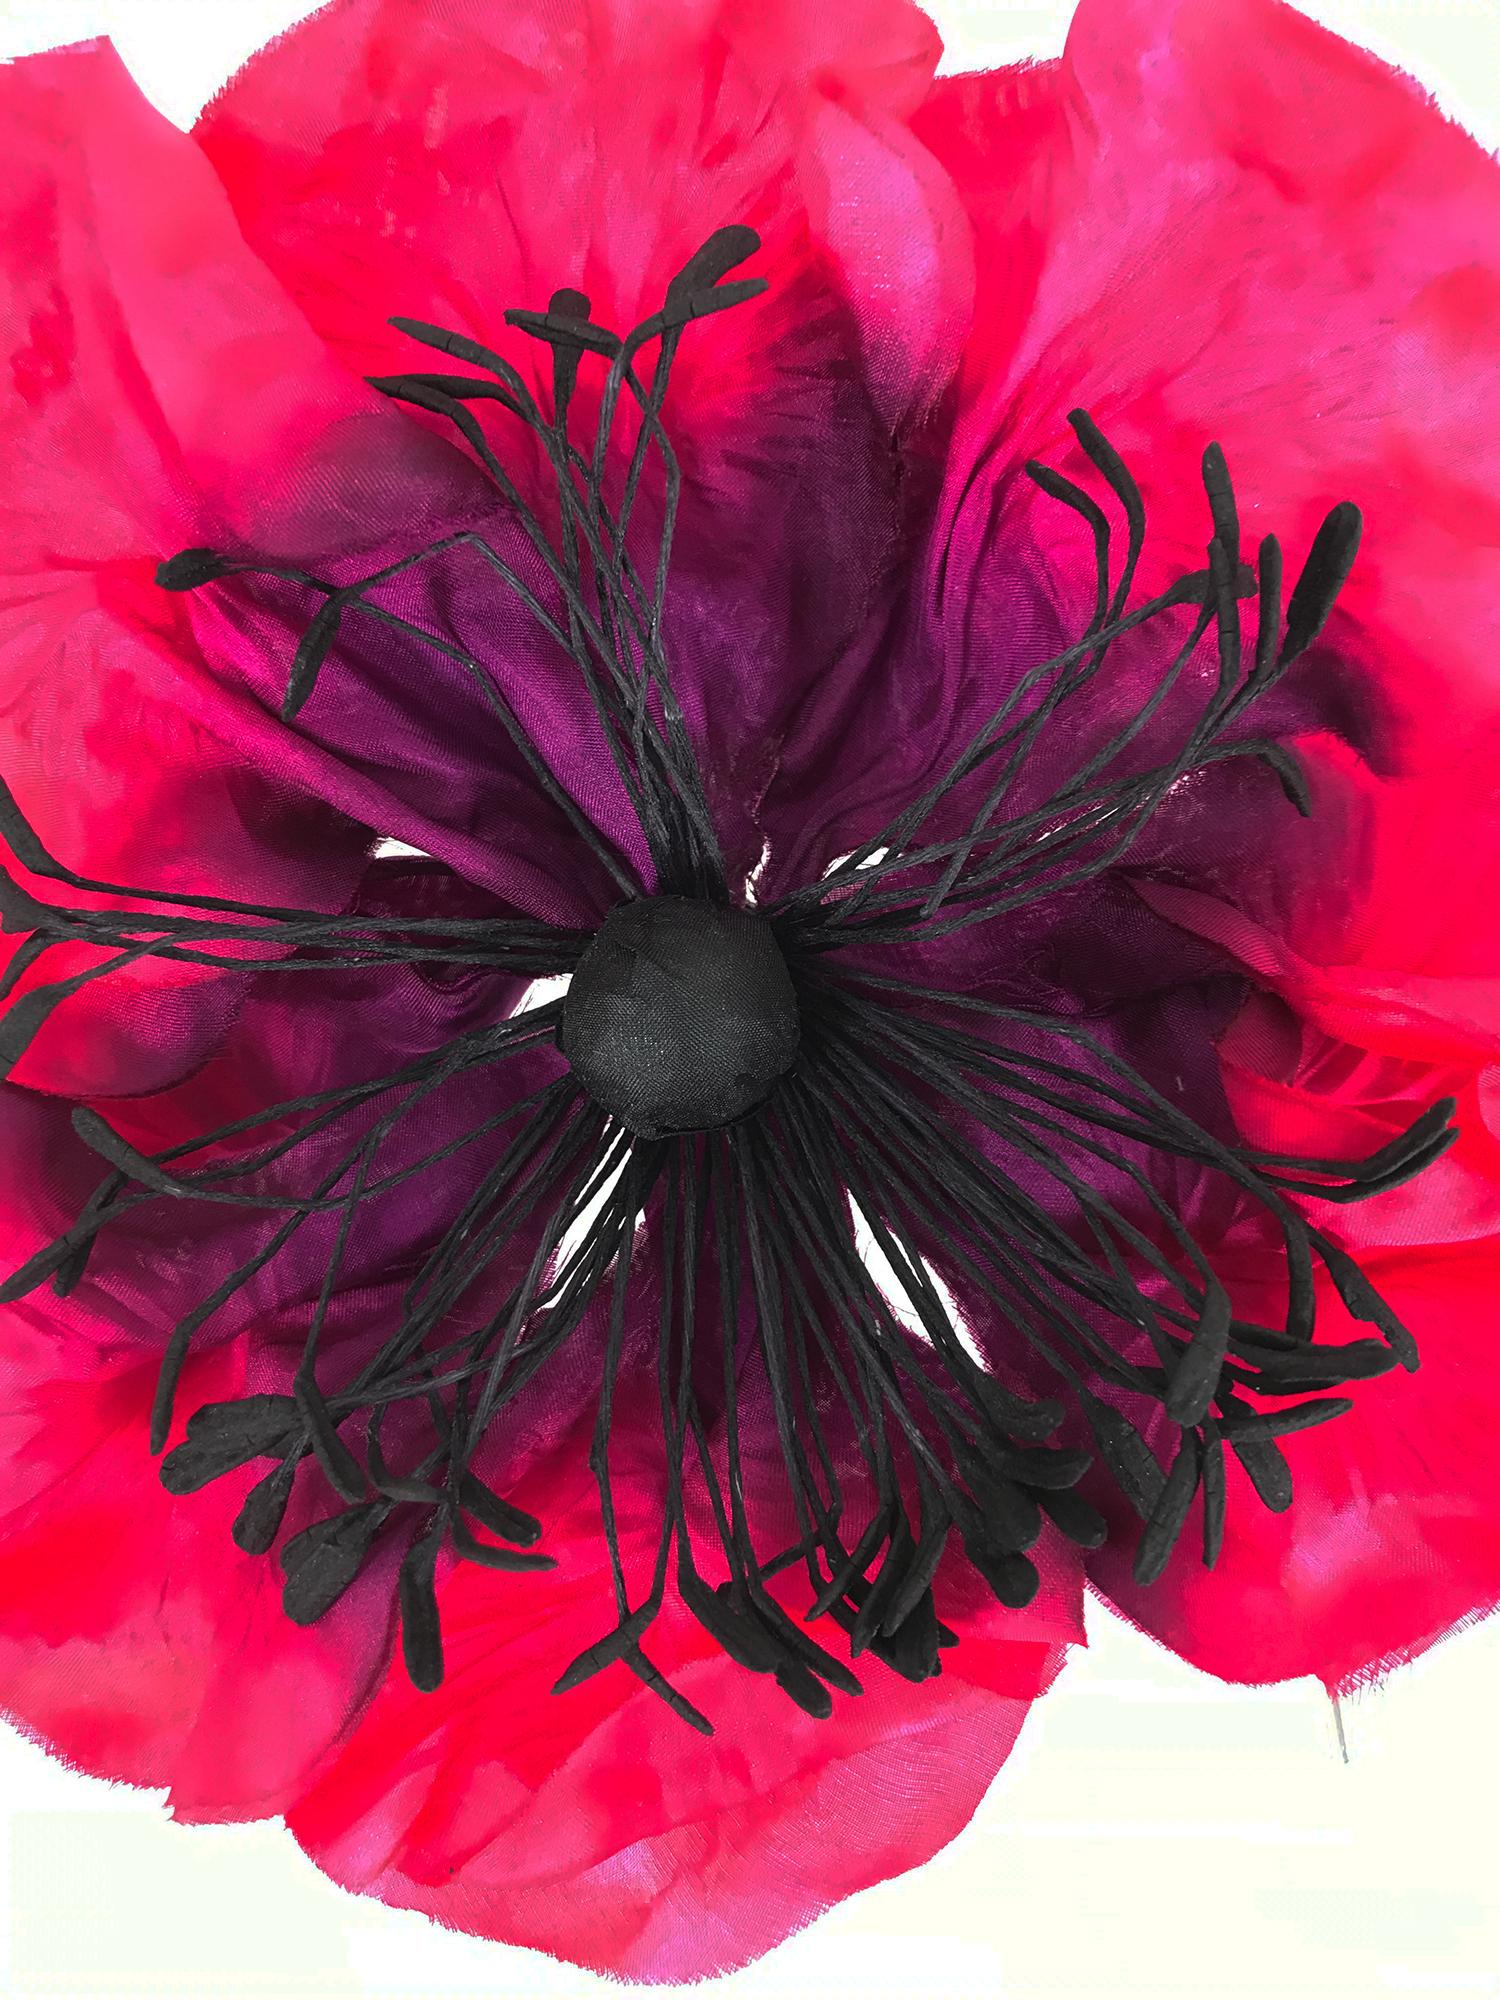 Vintage large hot pink and purple silk fantasy Poppy corsage from the 1990s. The perfect addition to any outfit. Large silk petals are hot pink with purple centers, the stamens and center are black. The back has a silver pin that closes to attach to